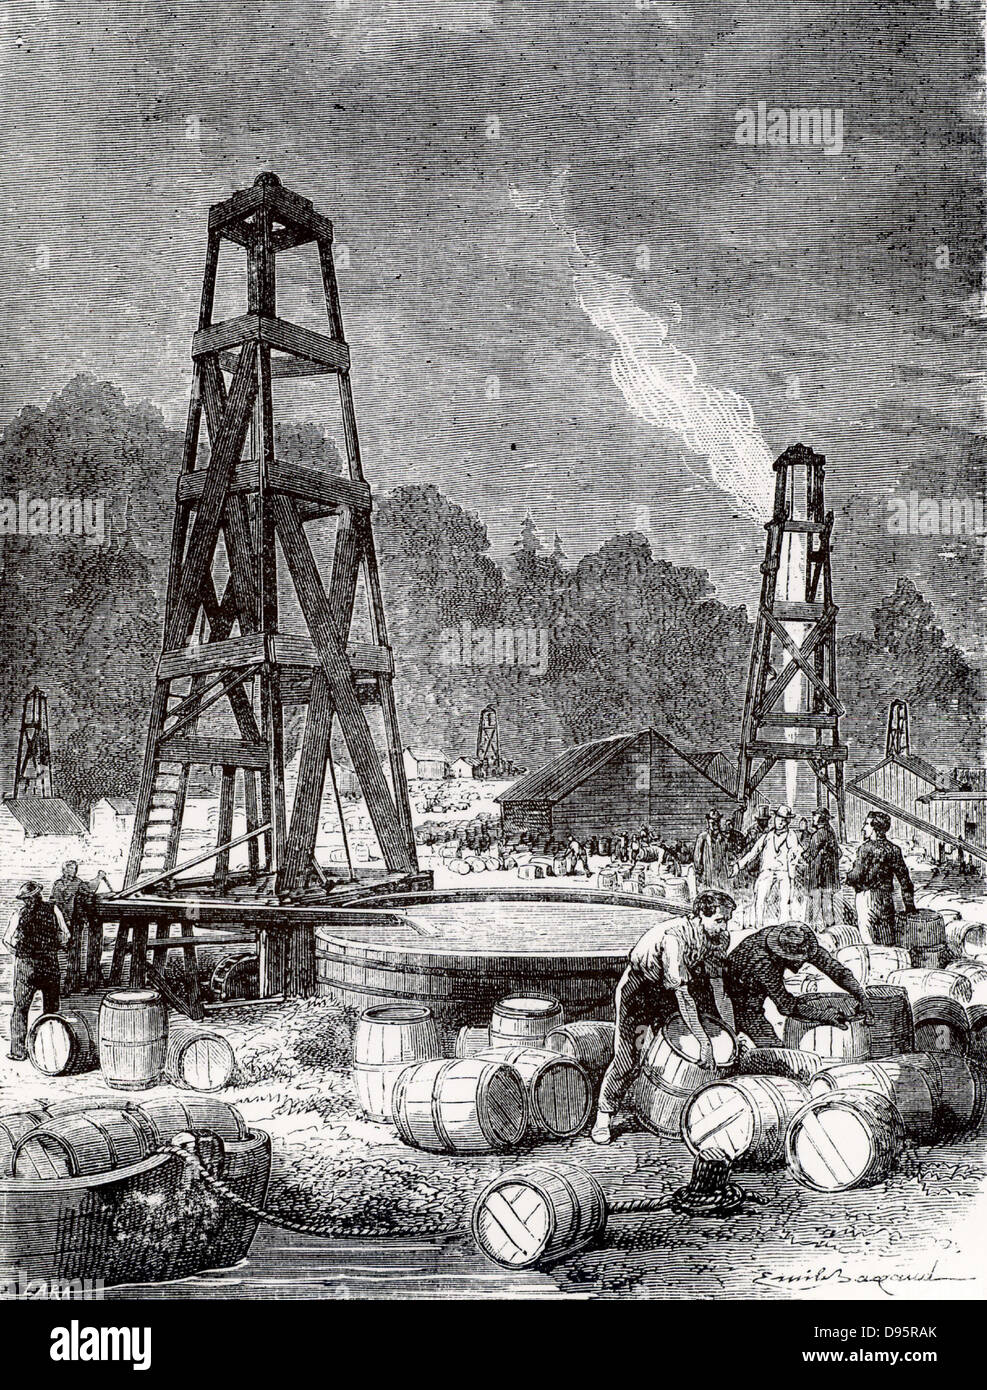 Oil wells at Oil Creek, 150 miles up the Allegheny River from Pittsburgh, Pennsylvania, USA.    Engraving from 'Les Merveilles de la Science' by Louis Figuier (Paris, c1870). Stock Photo